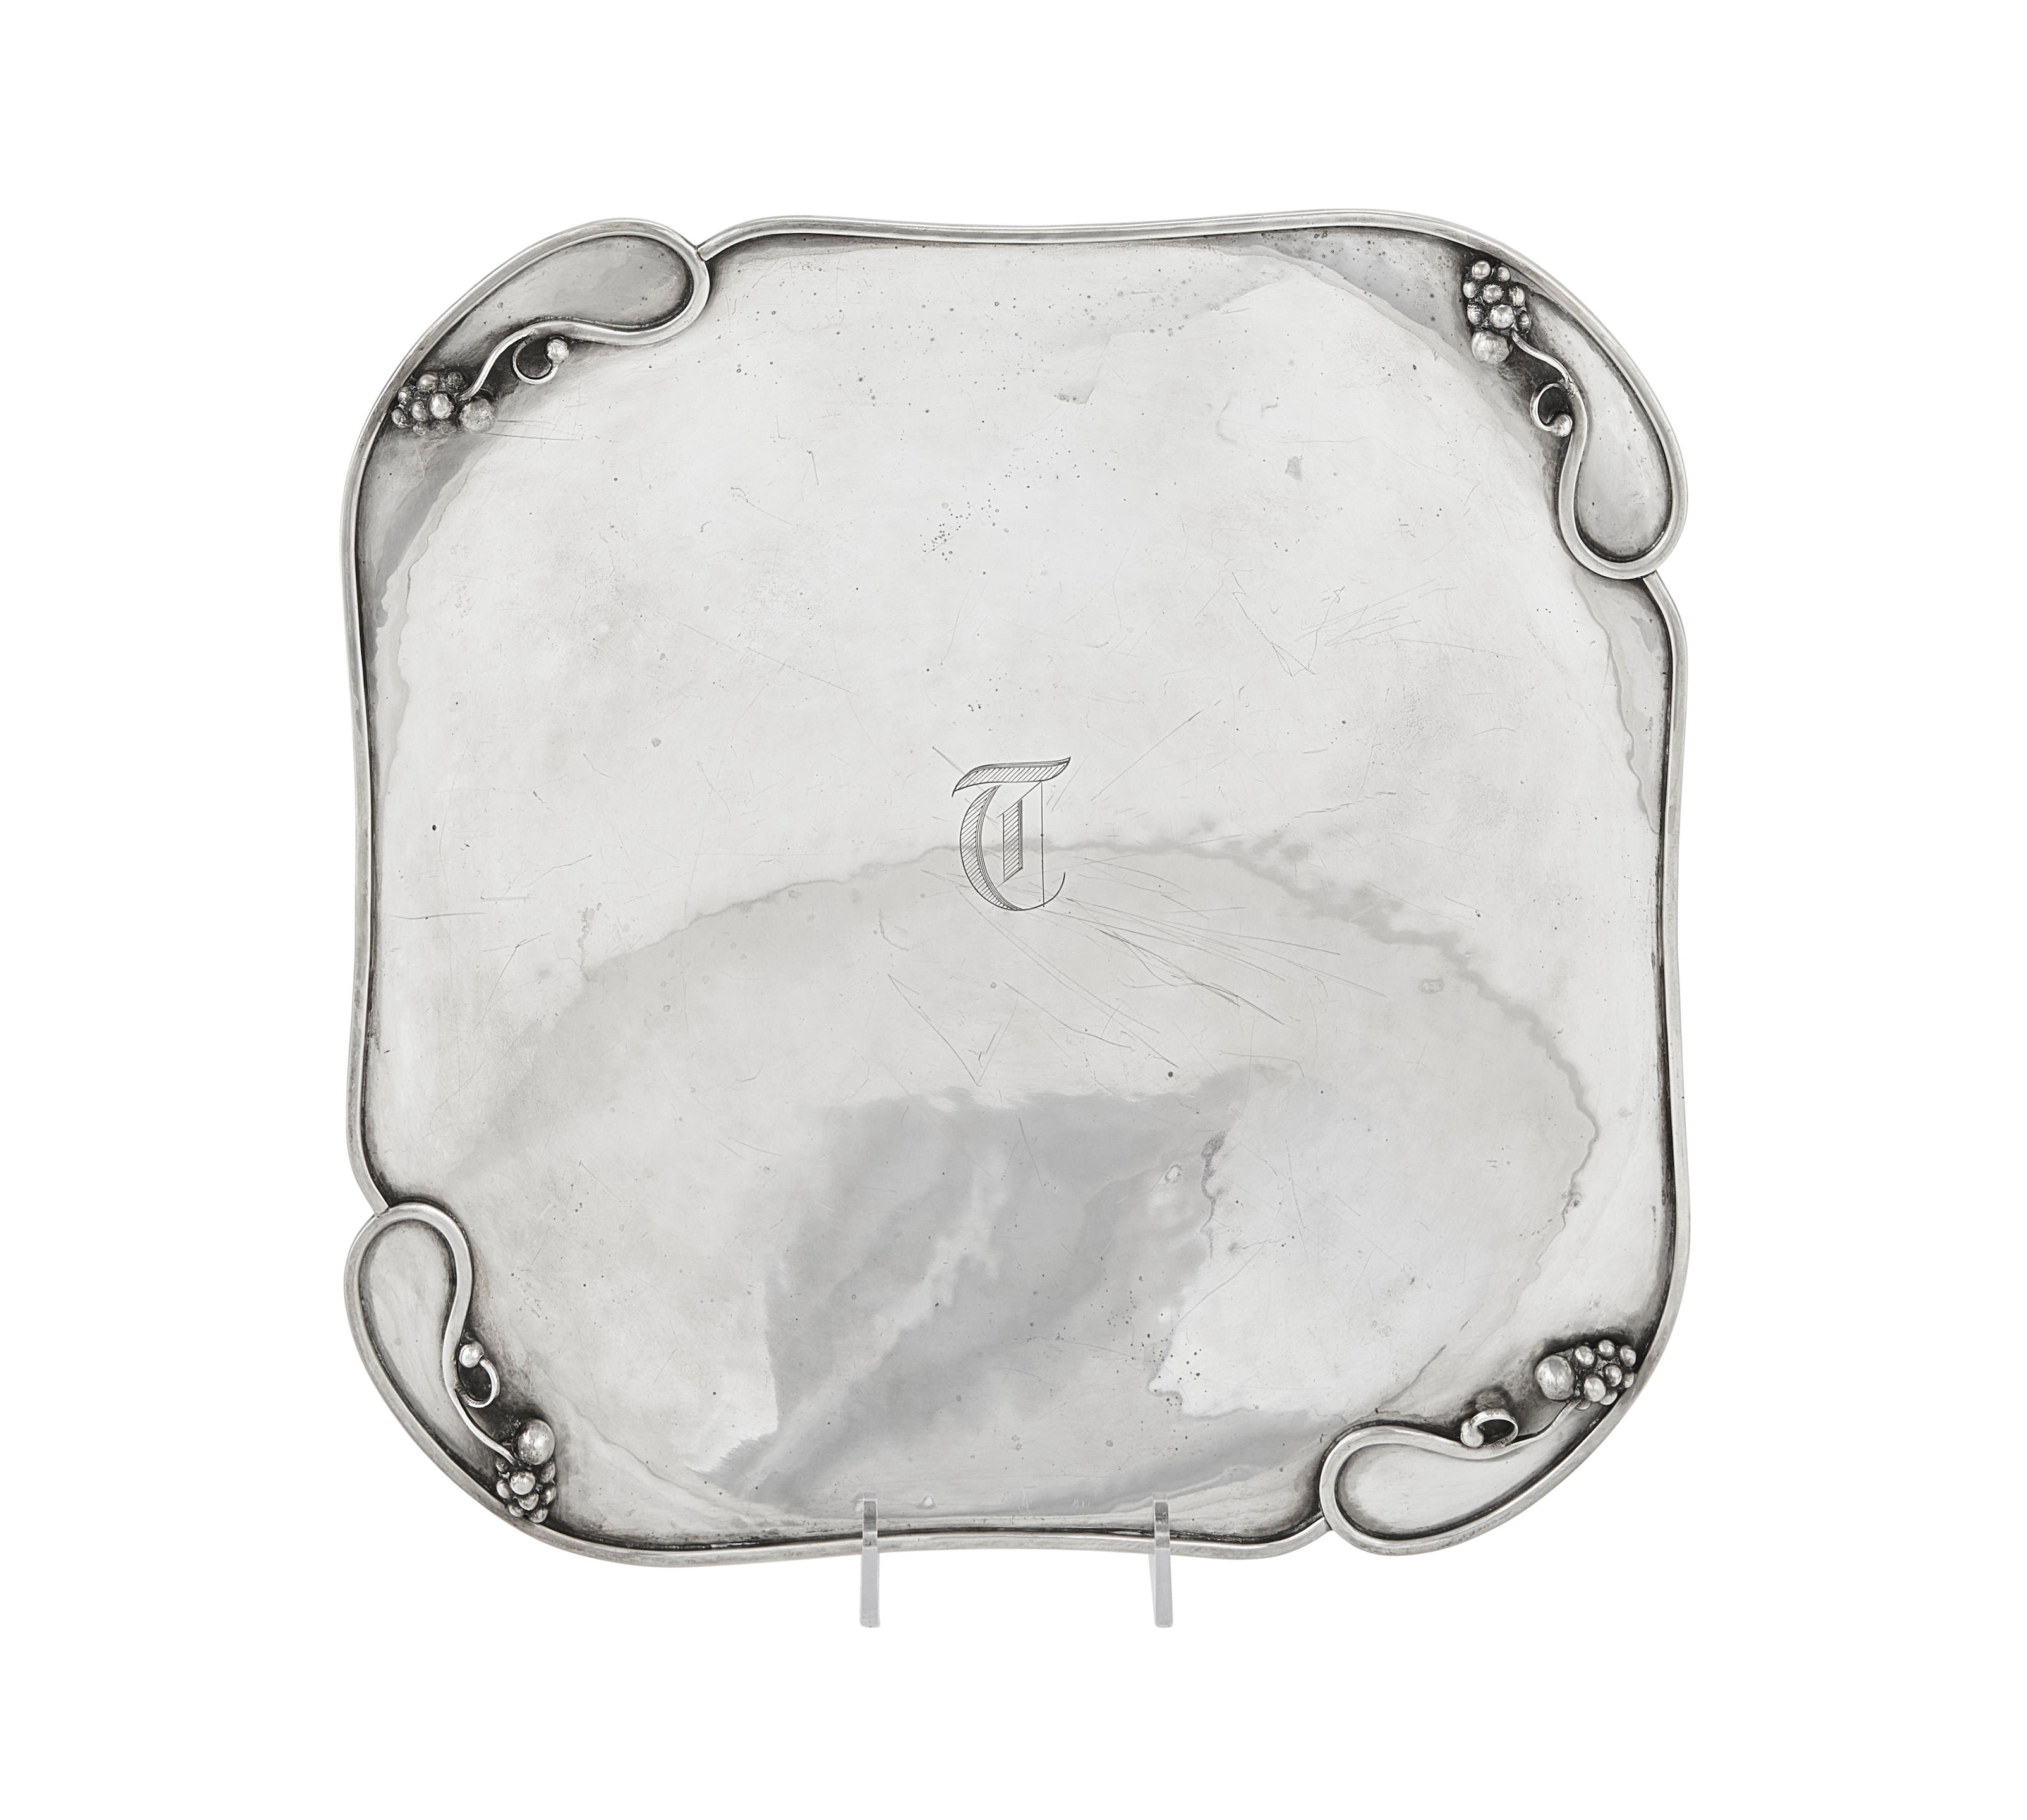 A Canadian sterling silver squared centerpiece dish